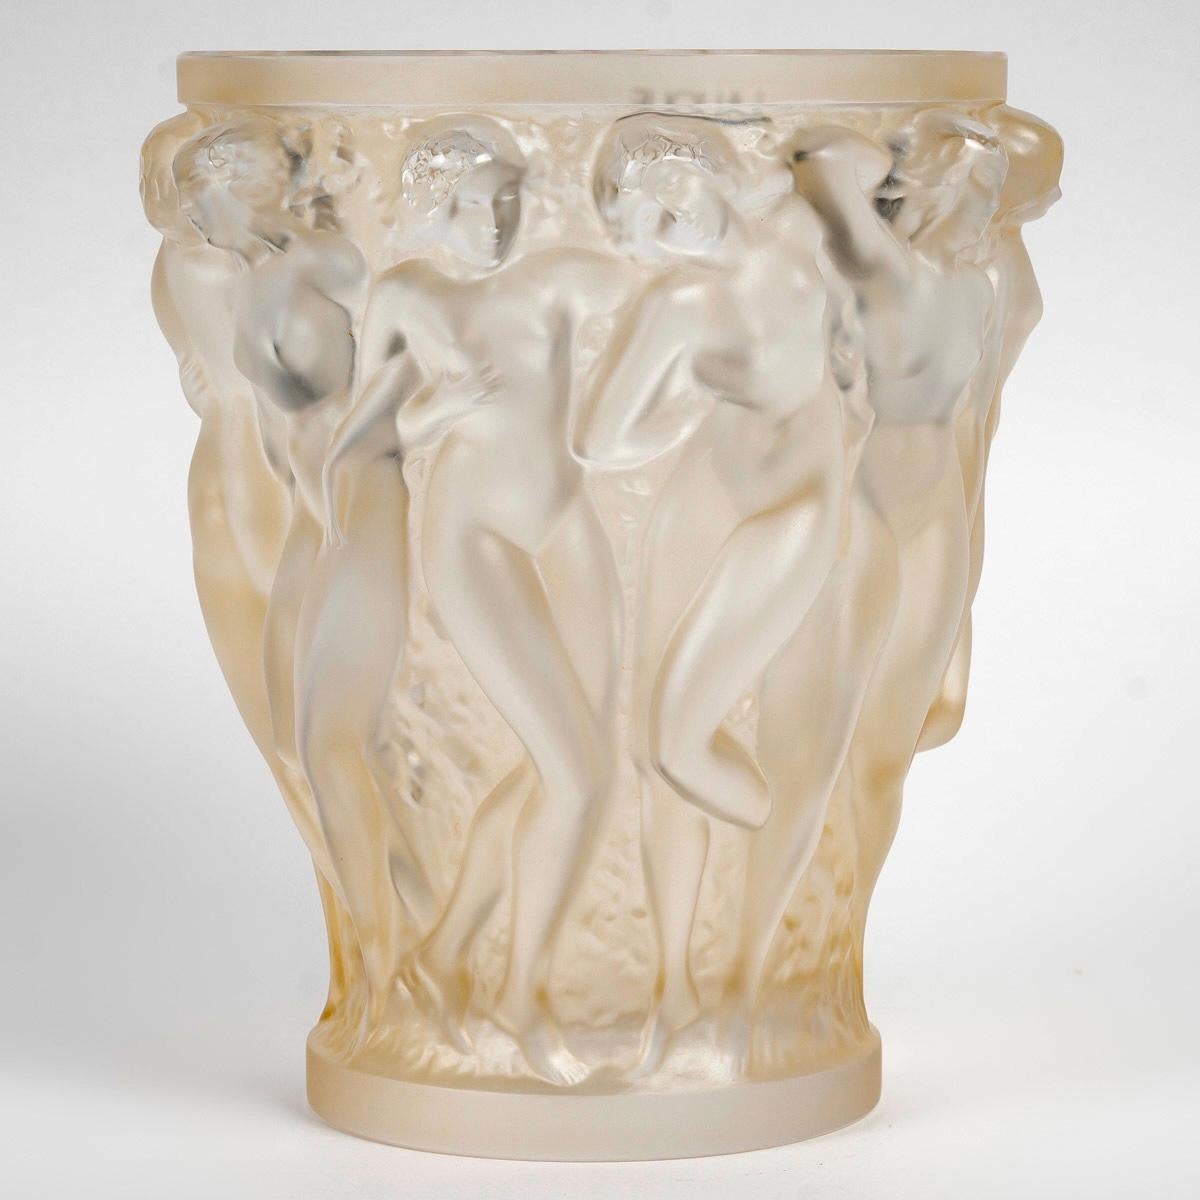 Vase “Bacchantes” made in frosted crystal with gold luster finish by Lalique France after a model by René Lalique dating from 1927.
Engraved signature. Numbered model. Original label.

Perfect condition. Like new with tag.

height: 24 cm

Félix